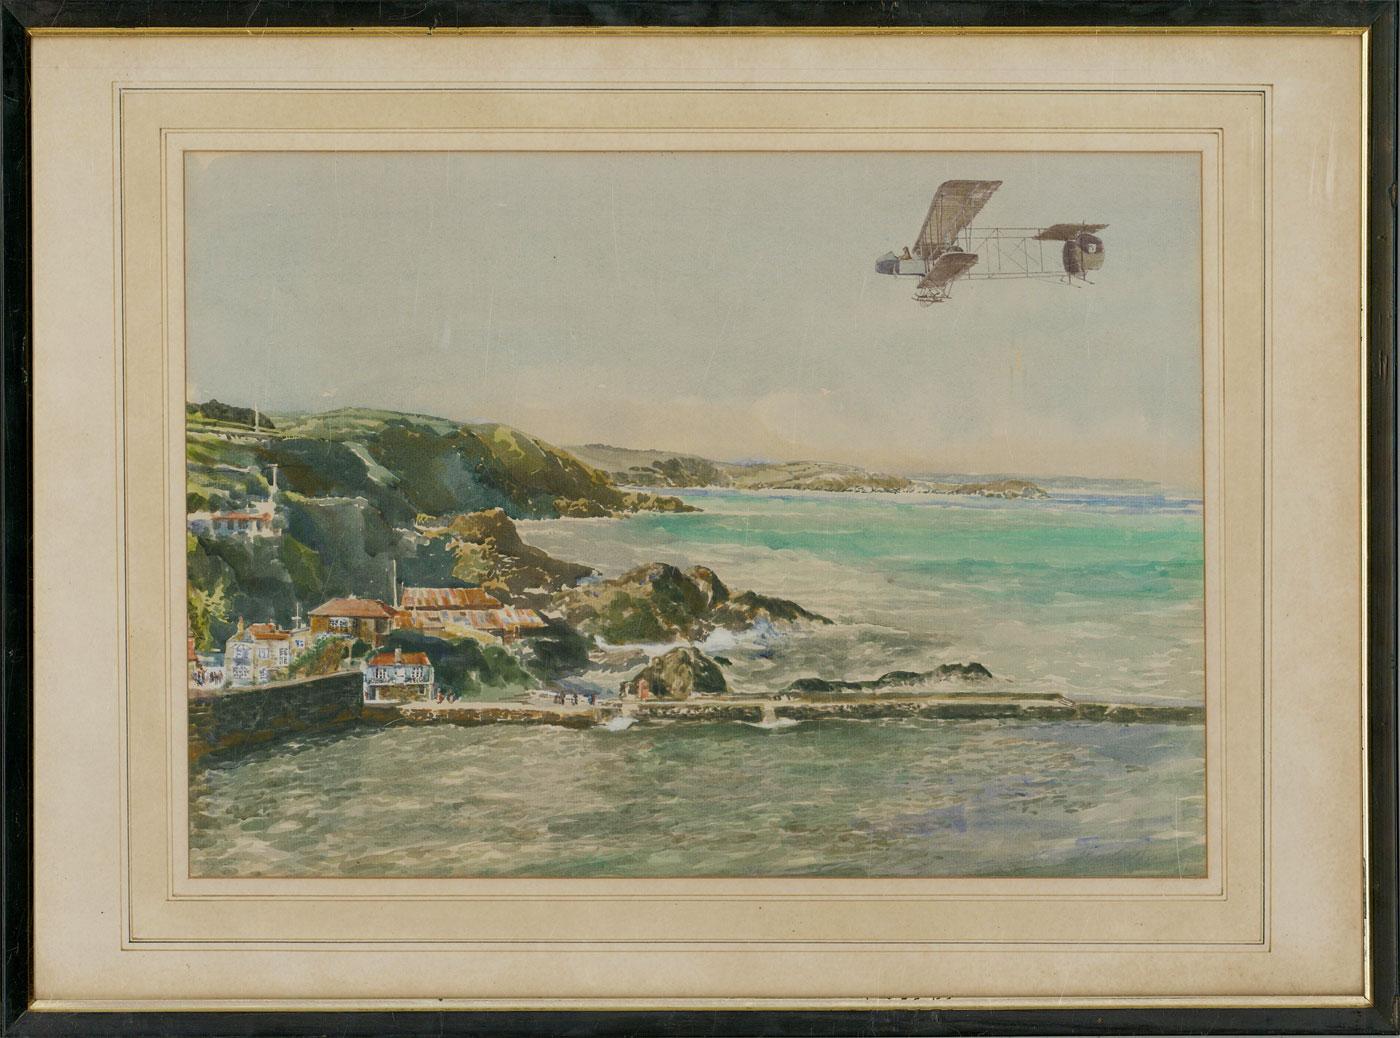 An early 20th-century plane flies proudly above a seaside town. Finished with subtle body colour. Well presented in a molded black frame with a gilded inner window, glazing, and a washline mount.Signed in the bottom right-hand corner.

 
On laid.